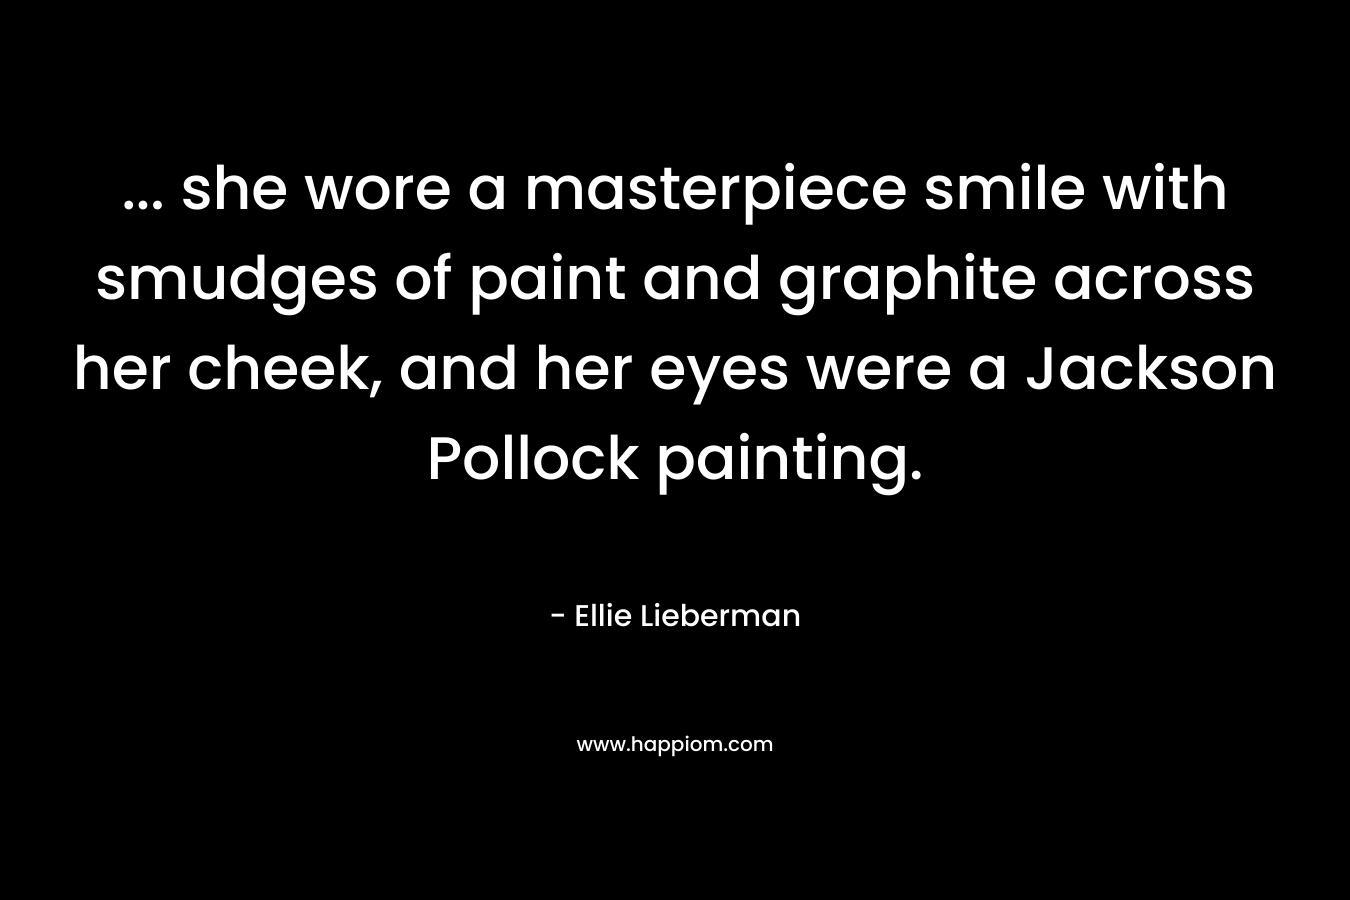 … she wore a masterpiece smile with smudges of paint and graphite across her cheek, and her eyes were a Jackson Pollock painting. – Ellie Lieberman